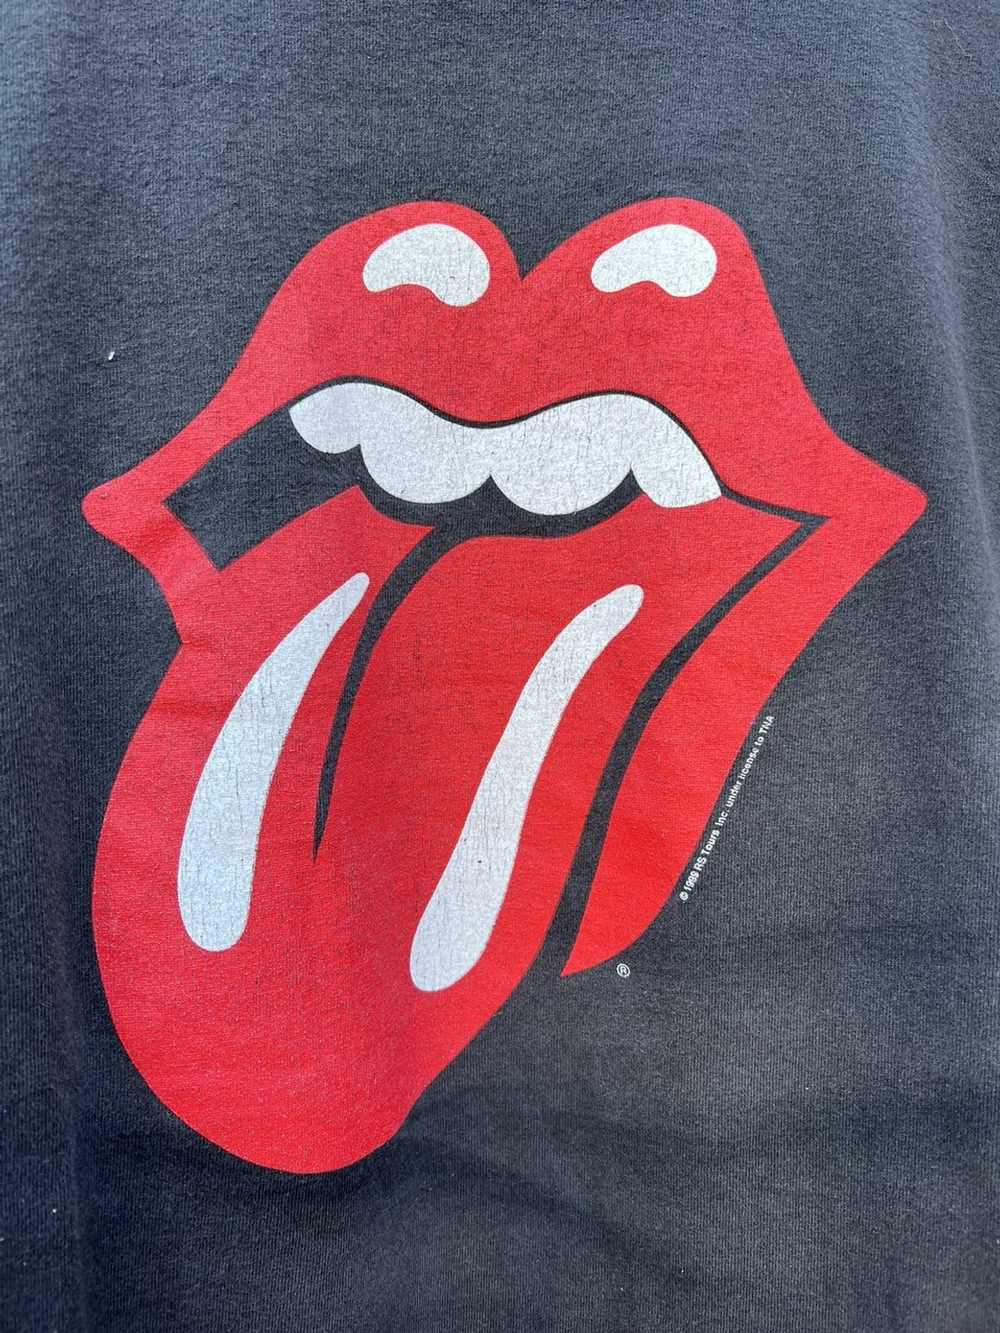 Band Tees × The Rolling Stones × Vintage Vintage … - image 2